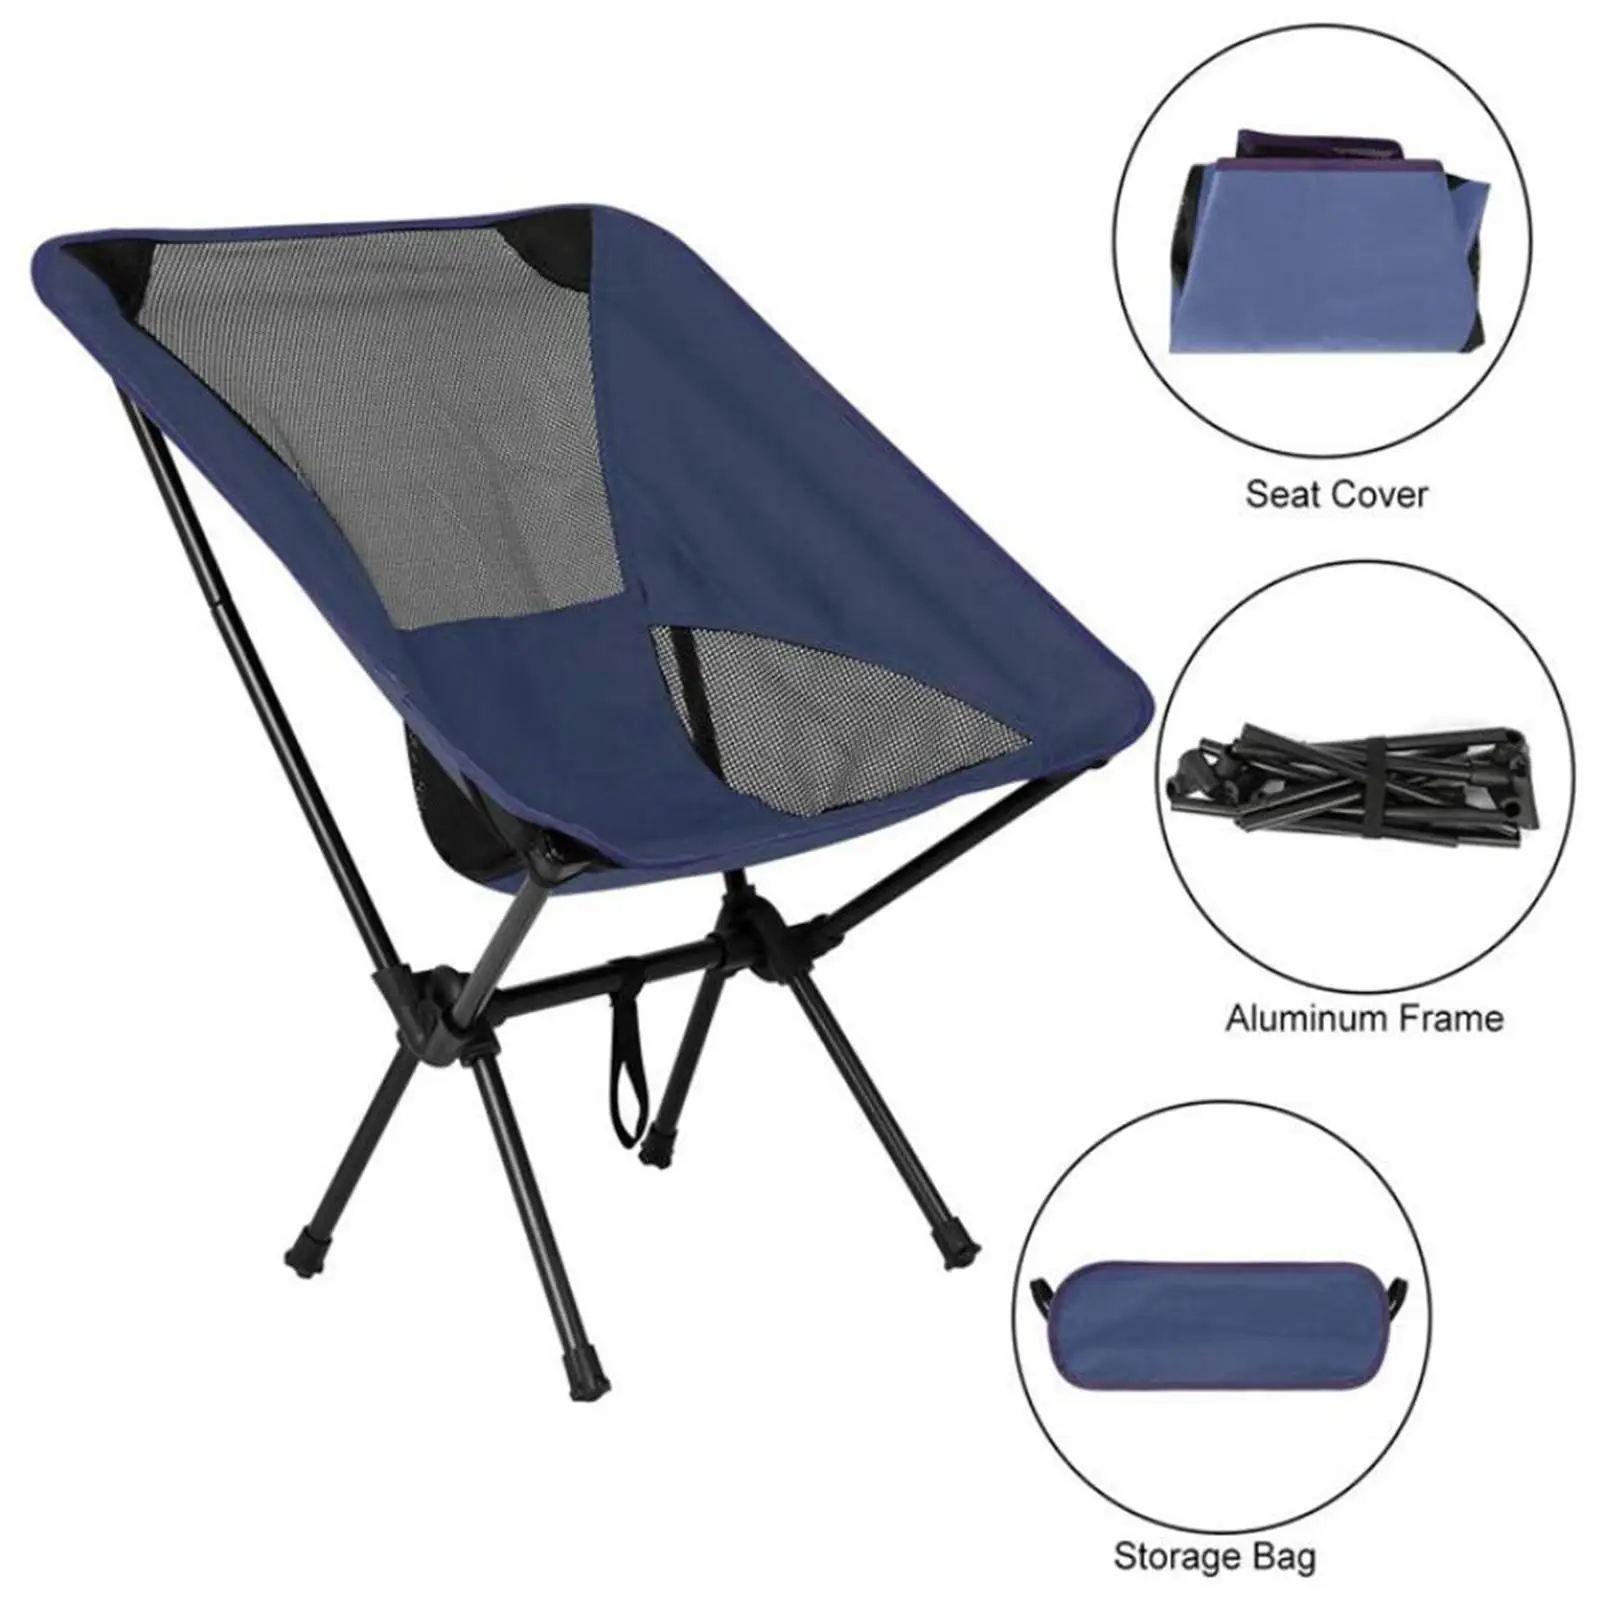 Oxford Cloth Folding Chair Heavy Duty Backrest Seat for Camping Fishing BBQ Backpacking Beach Painting